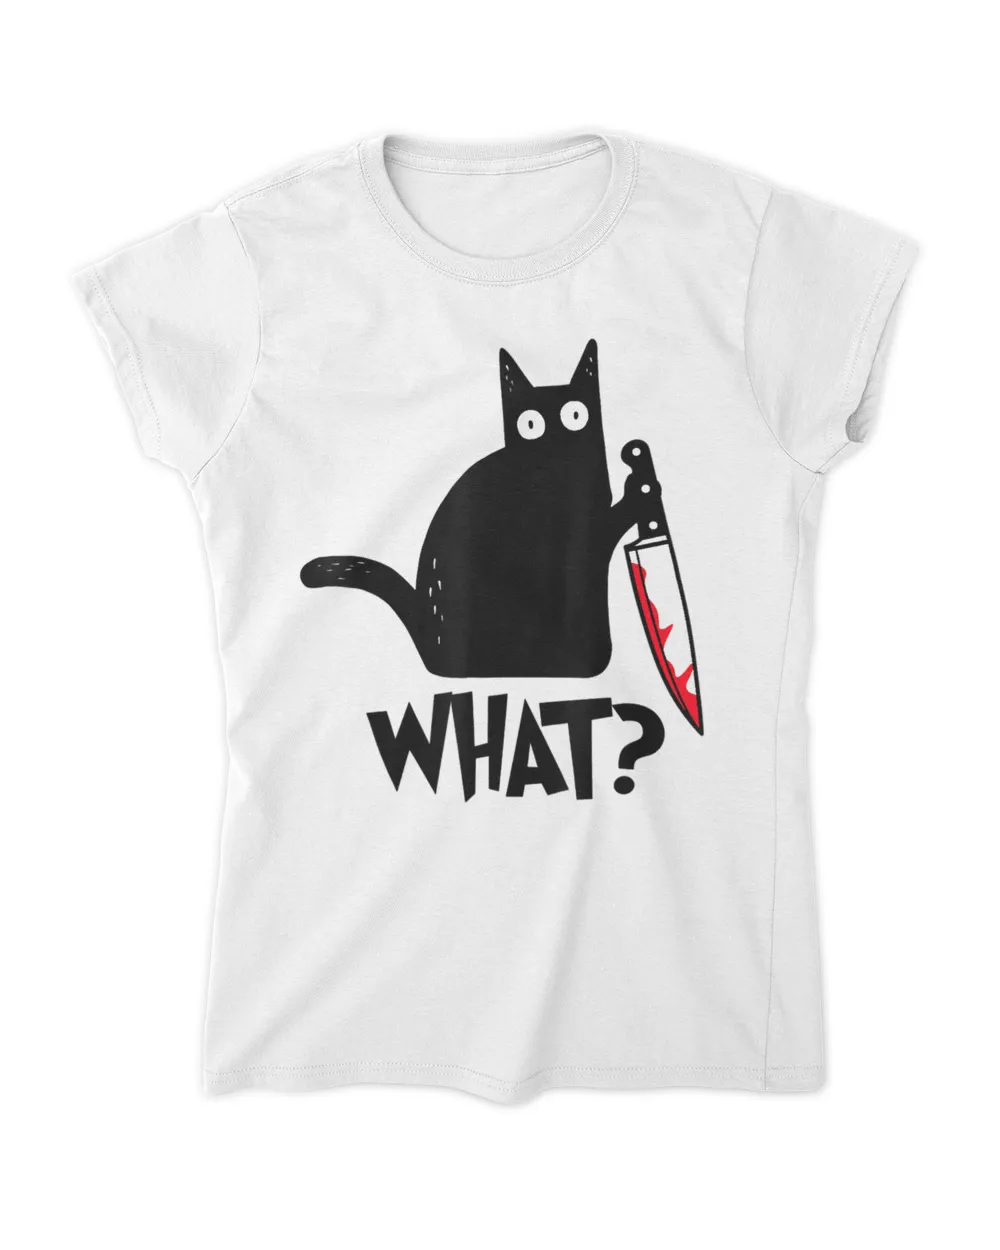 What Black Cat Murderous With Knife Tshirt